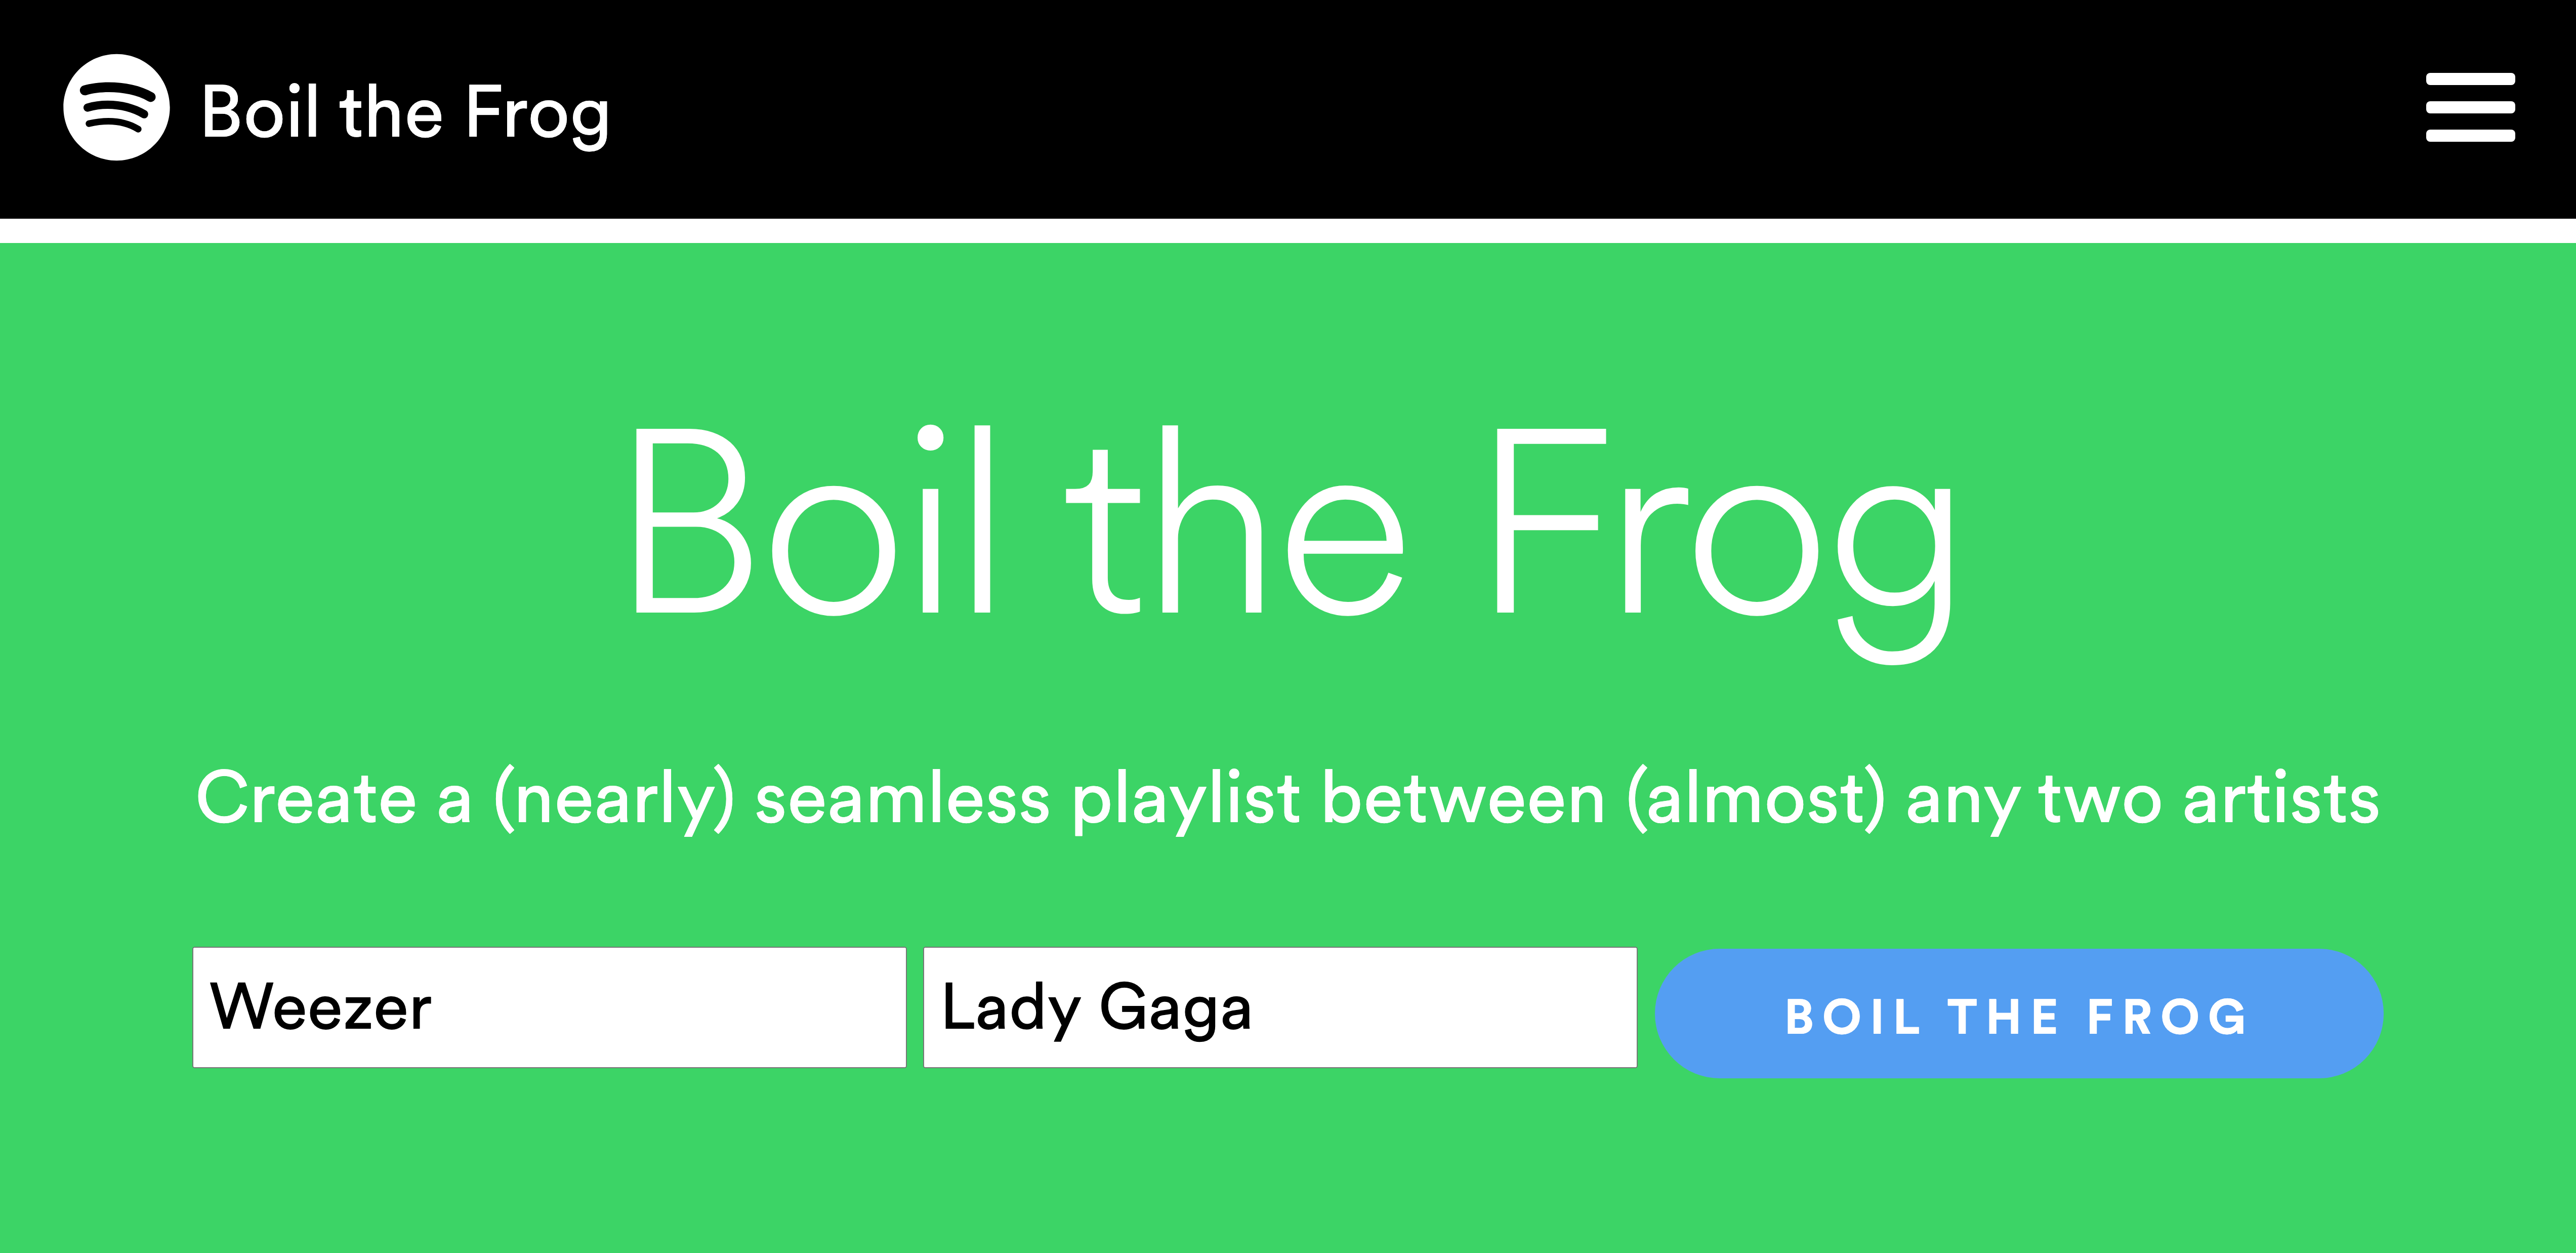 Boil the Frog generates a playlist that takes you between two artists